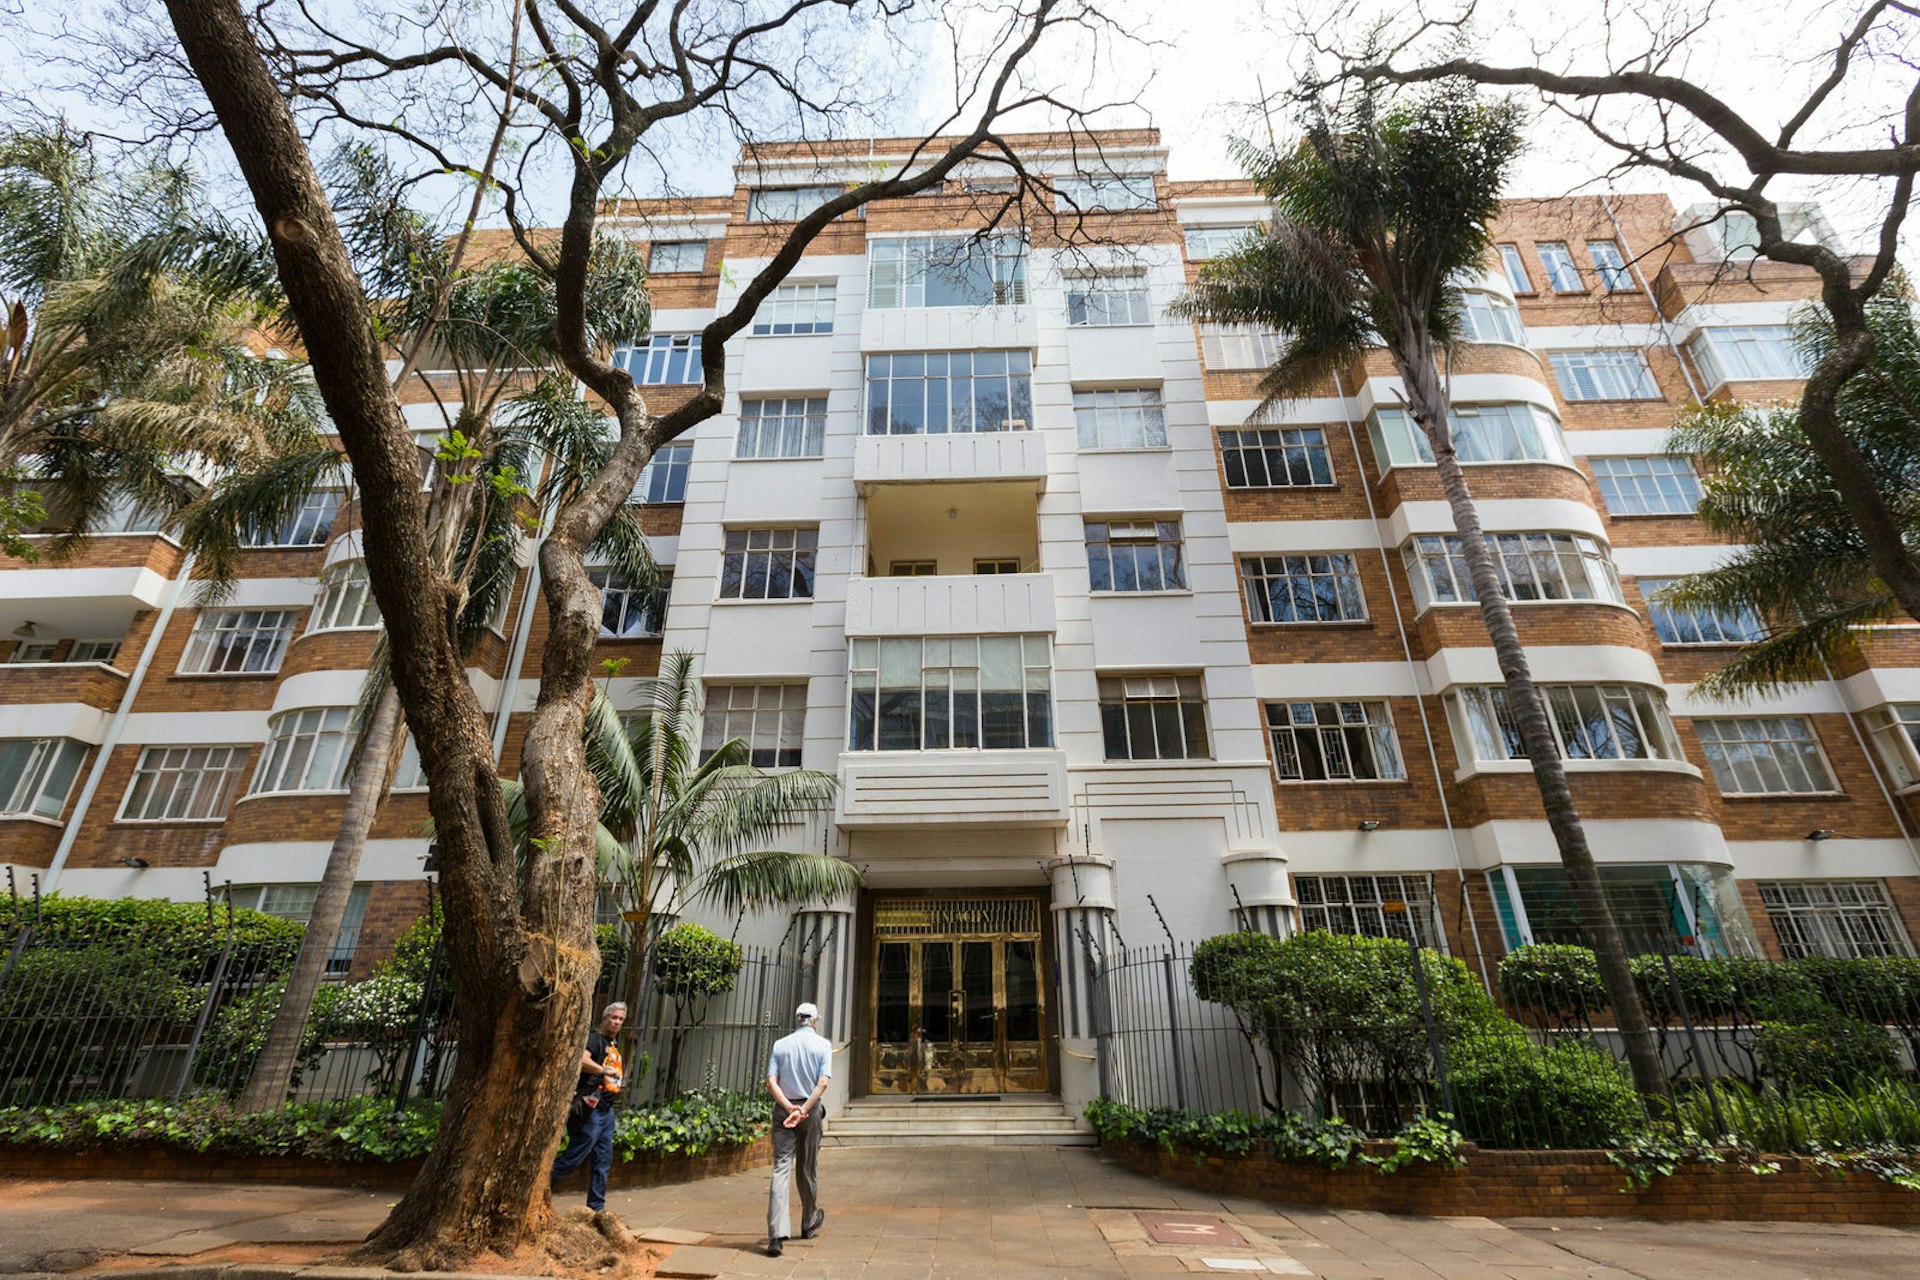 A elderly guide walks towards the golden doors of a towering art deco block of flats on one of the Johannesburg walking tours put on by the Heritage Foundation © Heather Mason / Lonely Planet